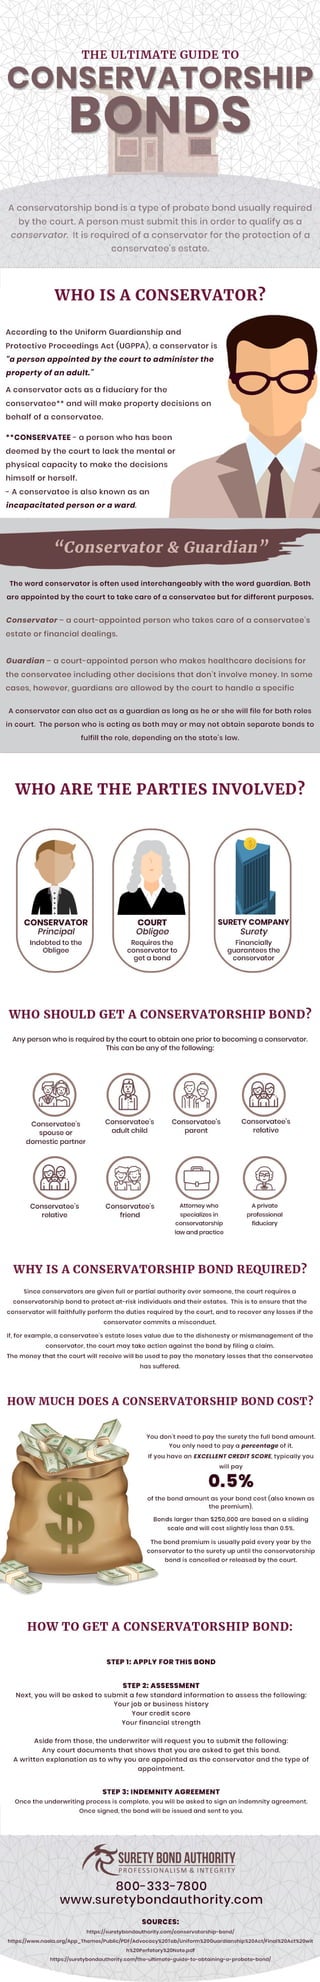 The Ultimate Guide to Conservatorship Bonds